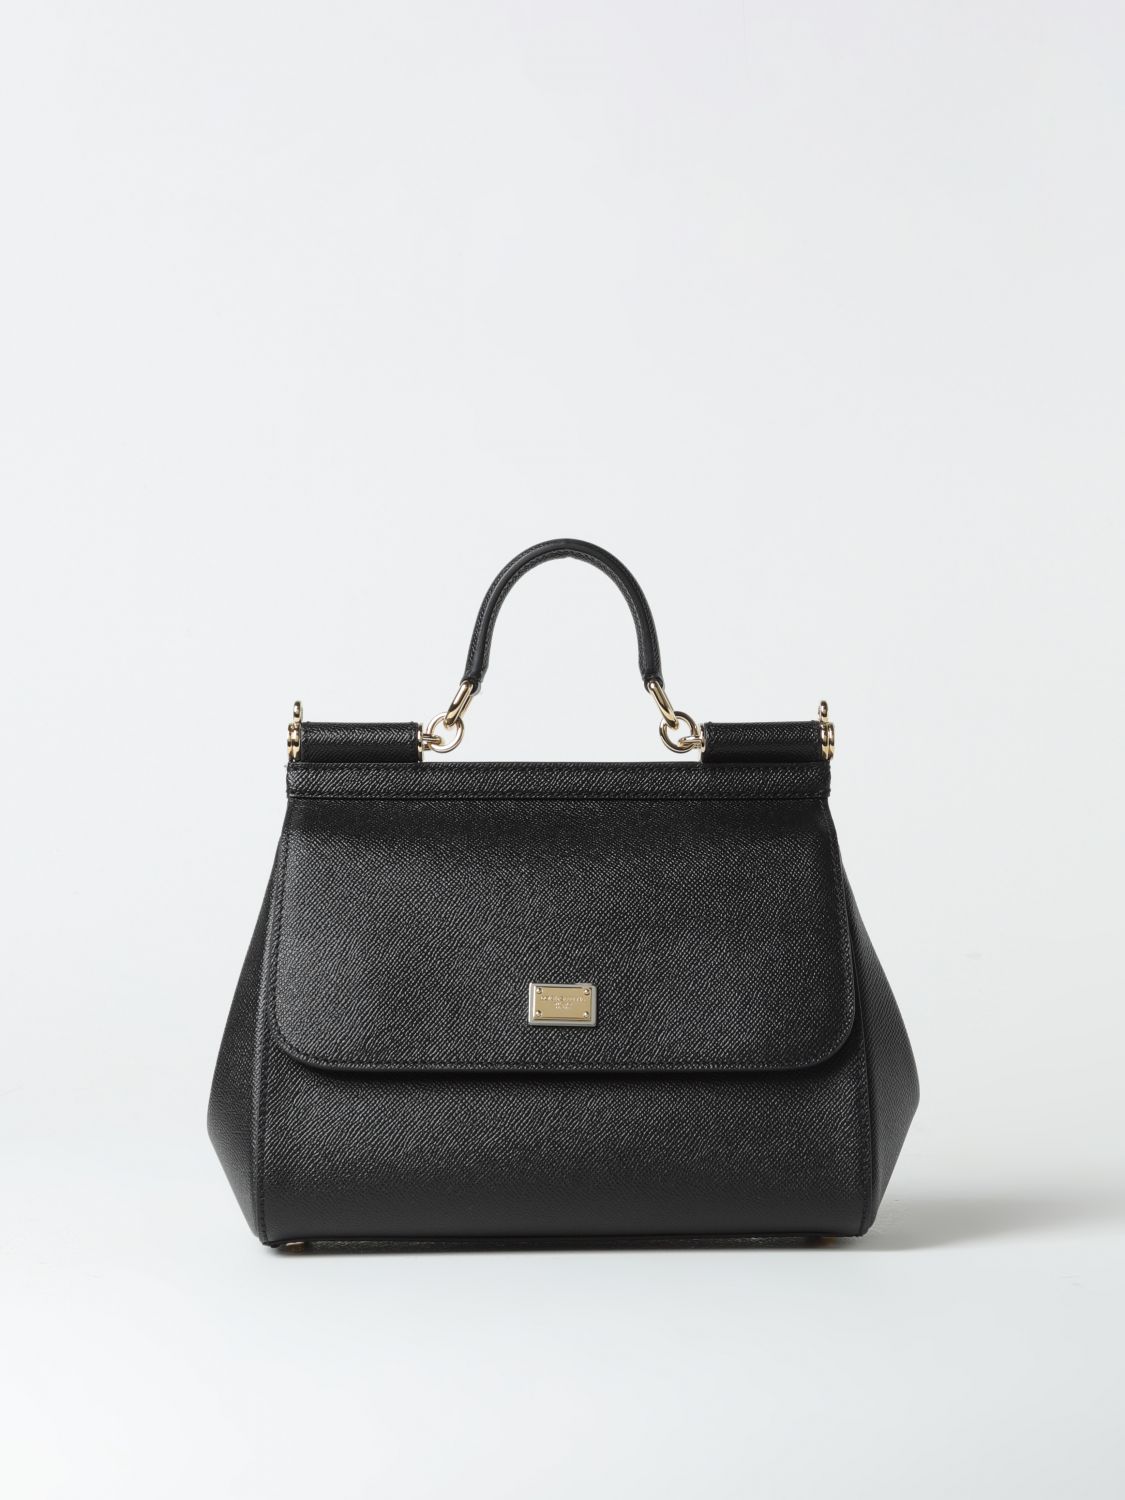 Dolce & Gabbana Sicily Bag In Micro Grained Leather In Black